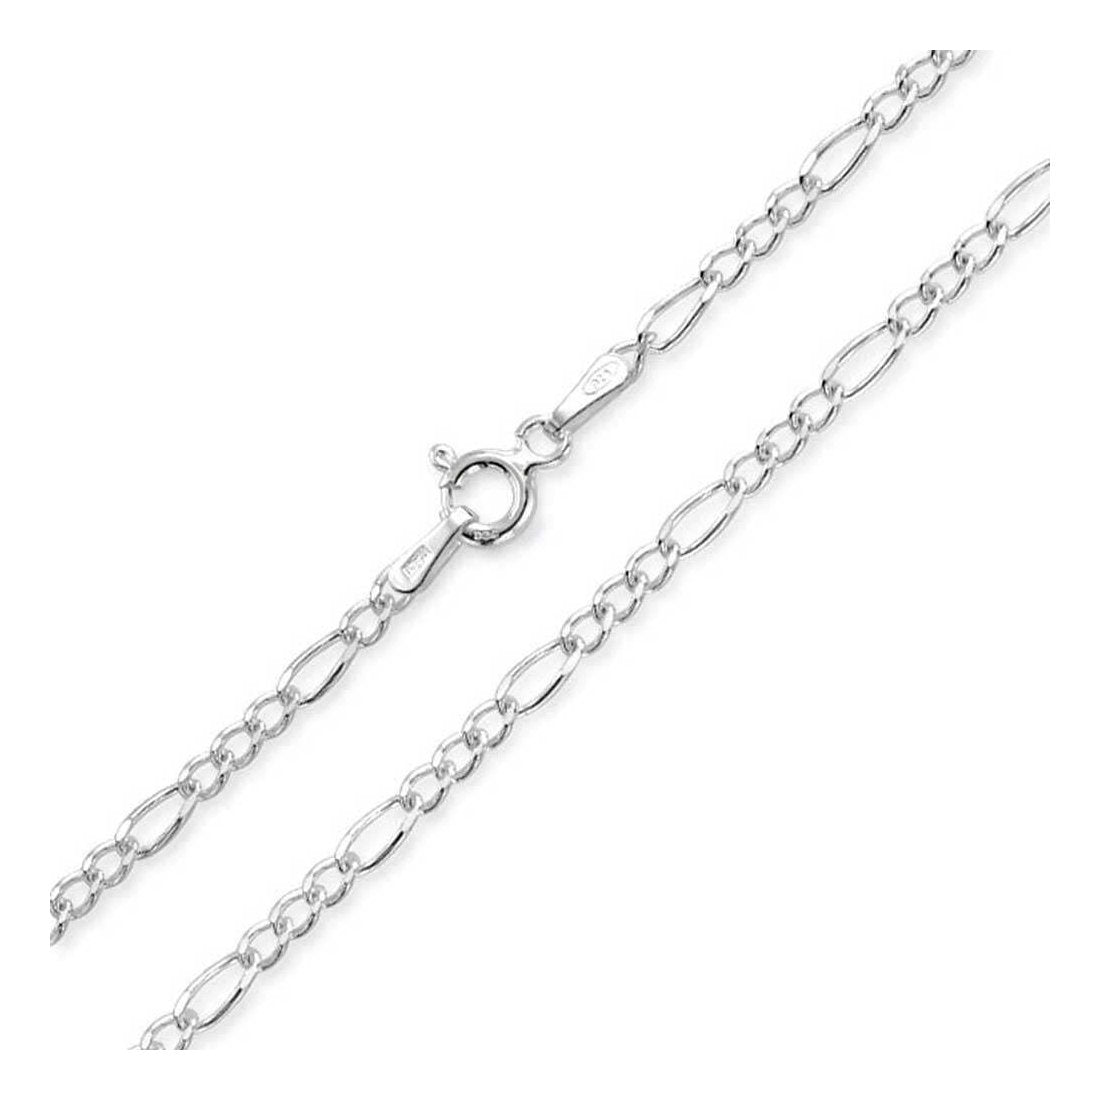 6.2MM 150 Figaro Link Chain .925 Solid Sterling Silver Sizes "7-36"